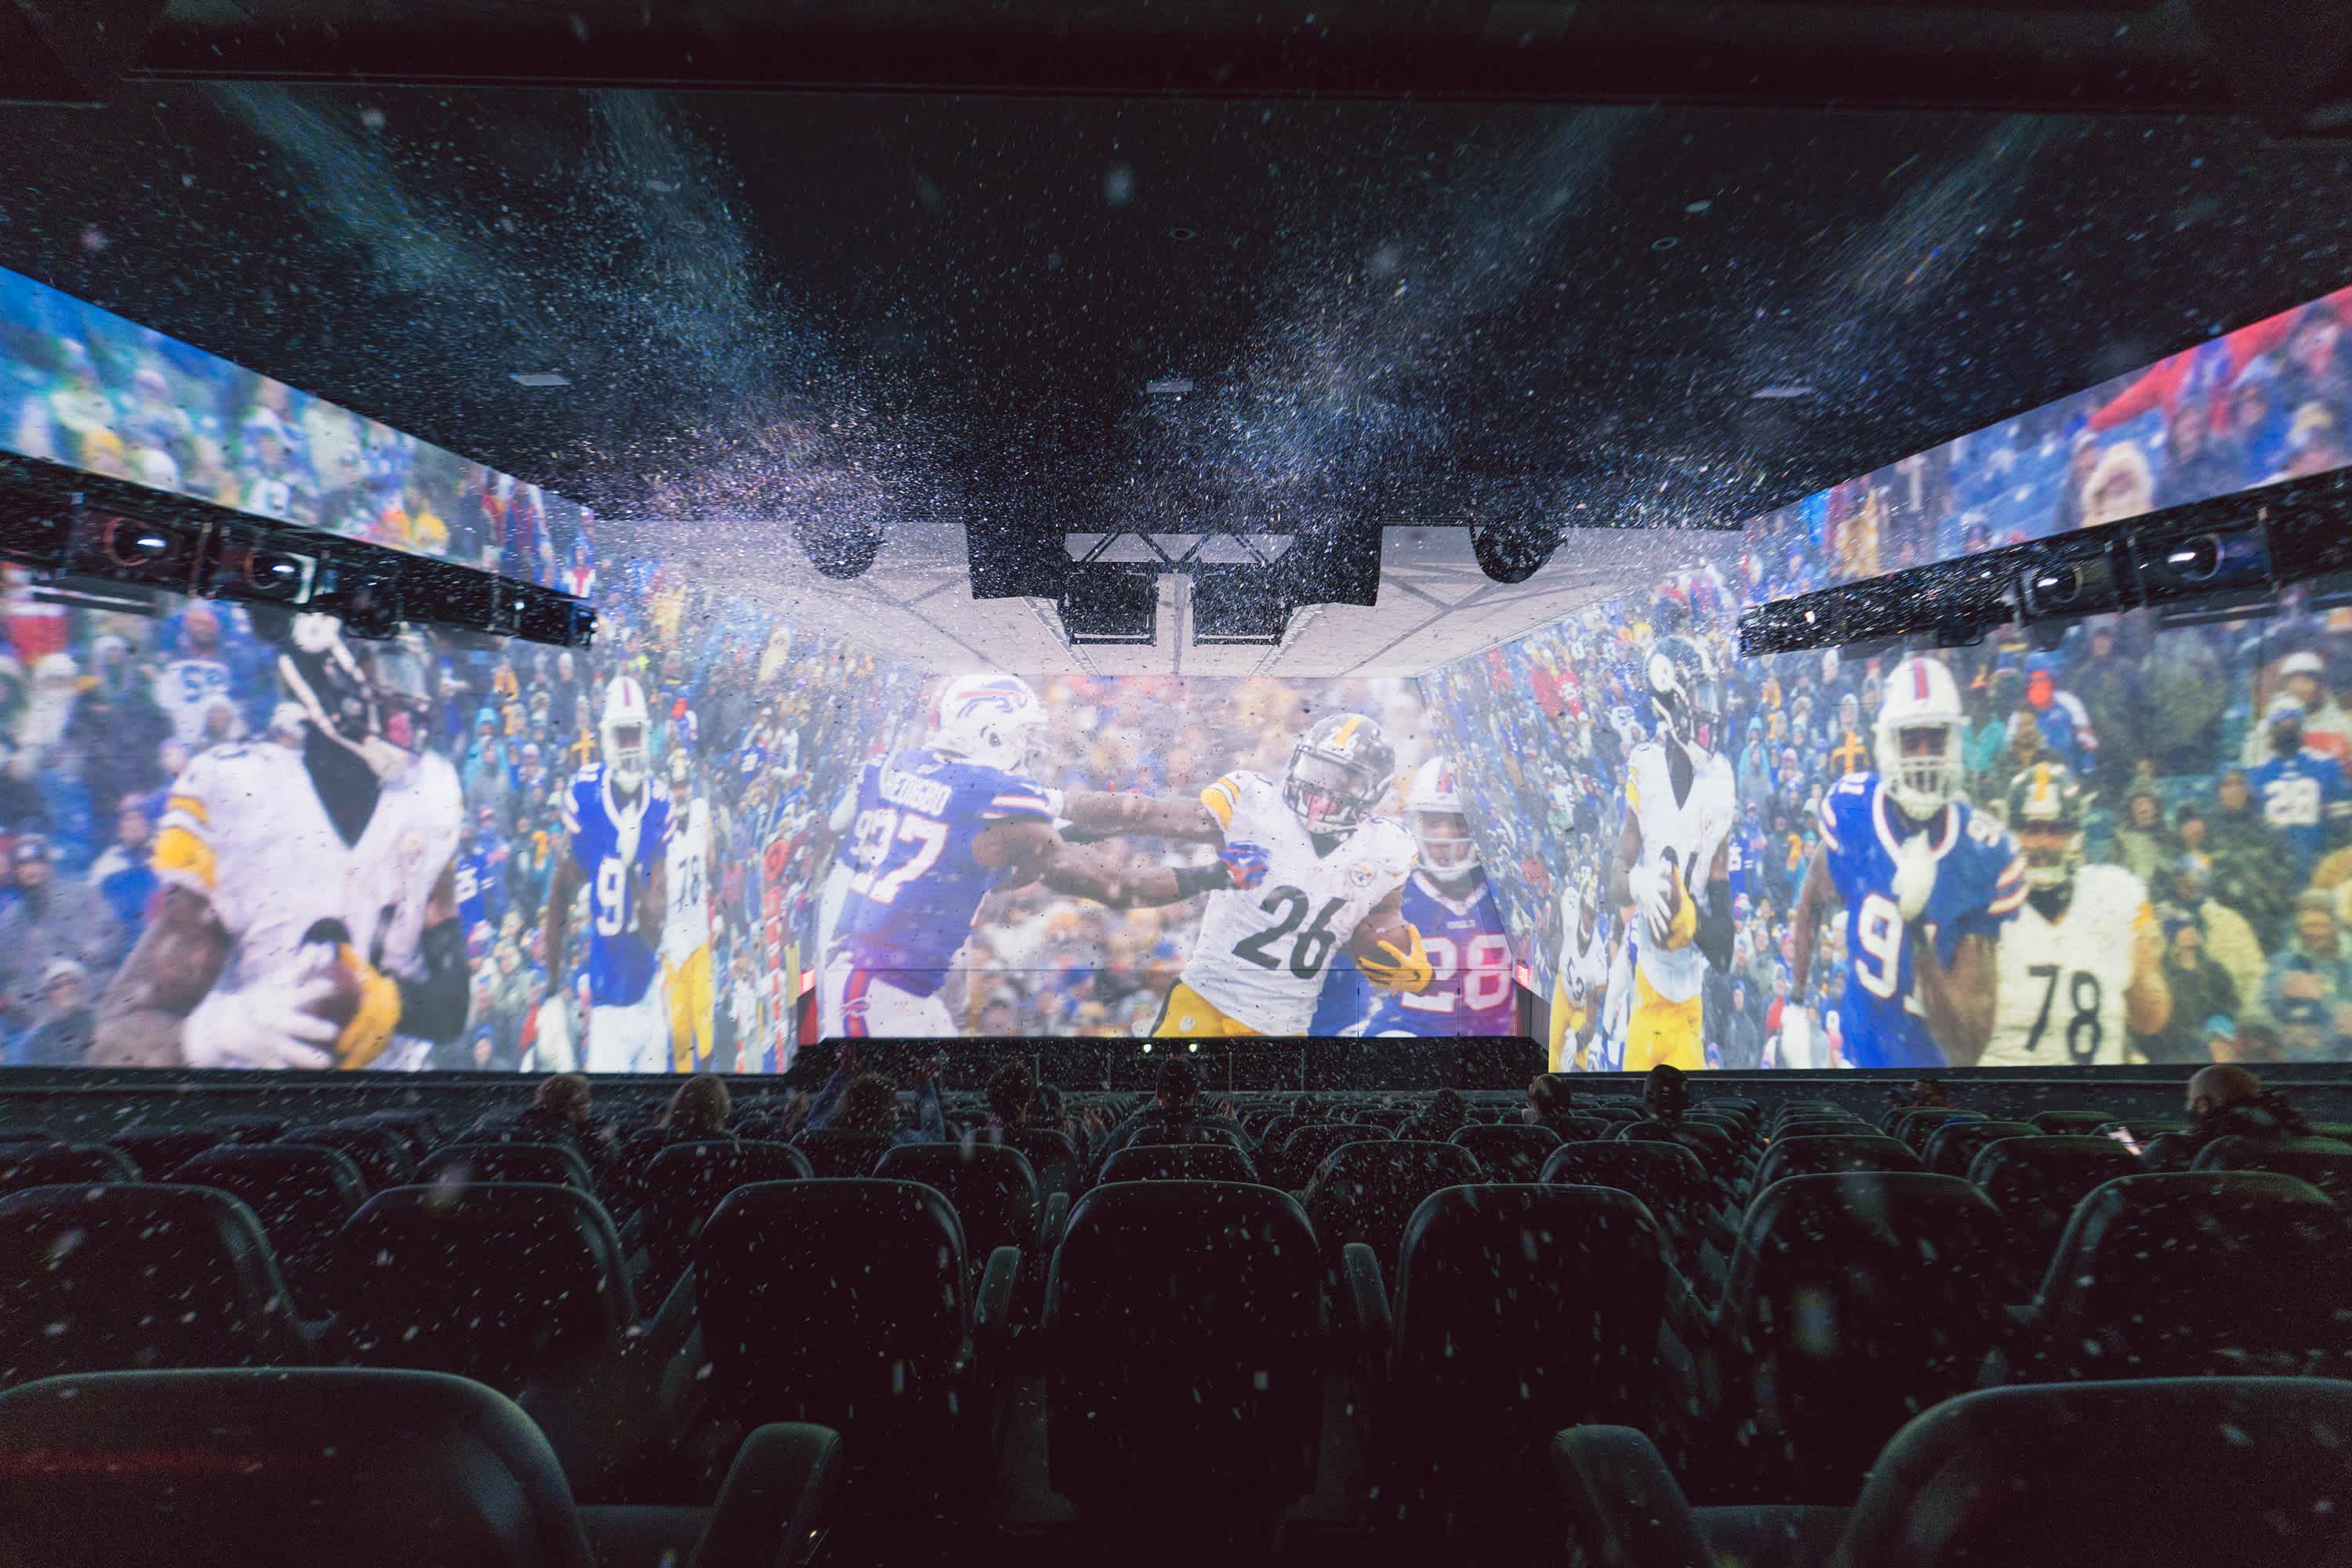 NFL Experience theatre